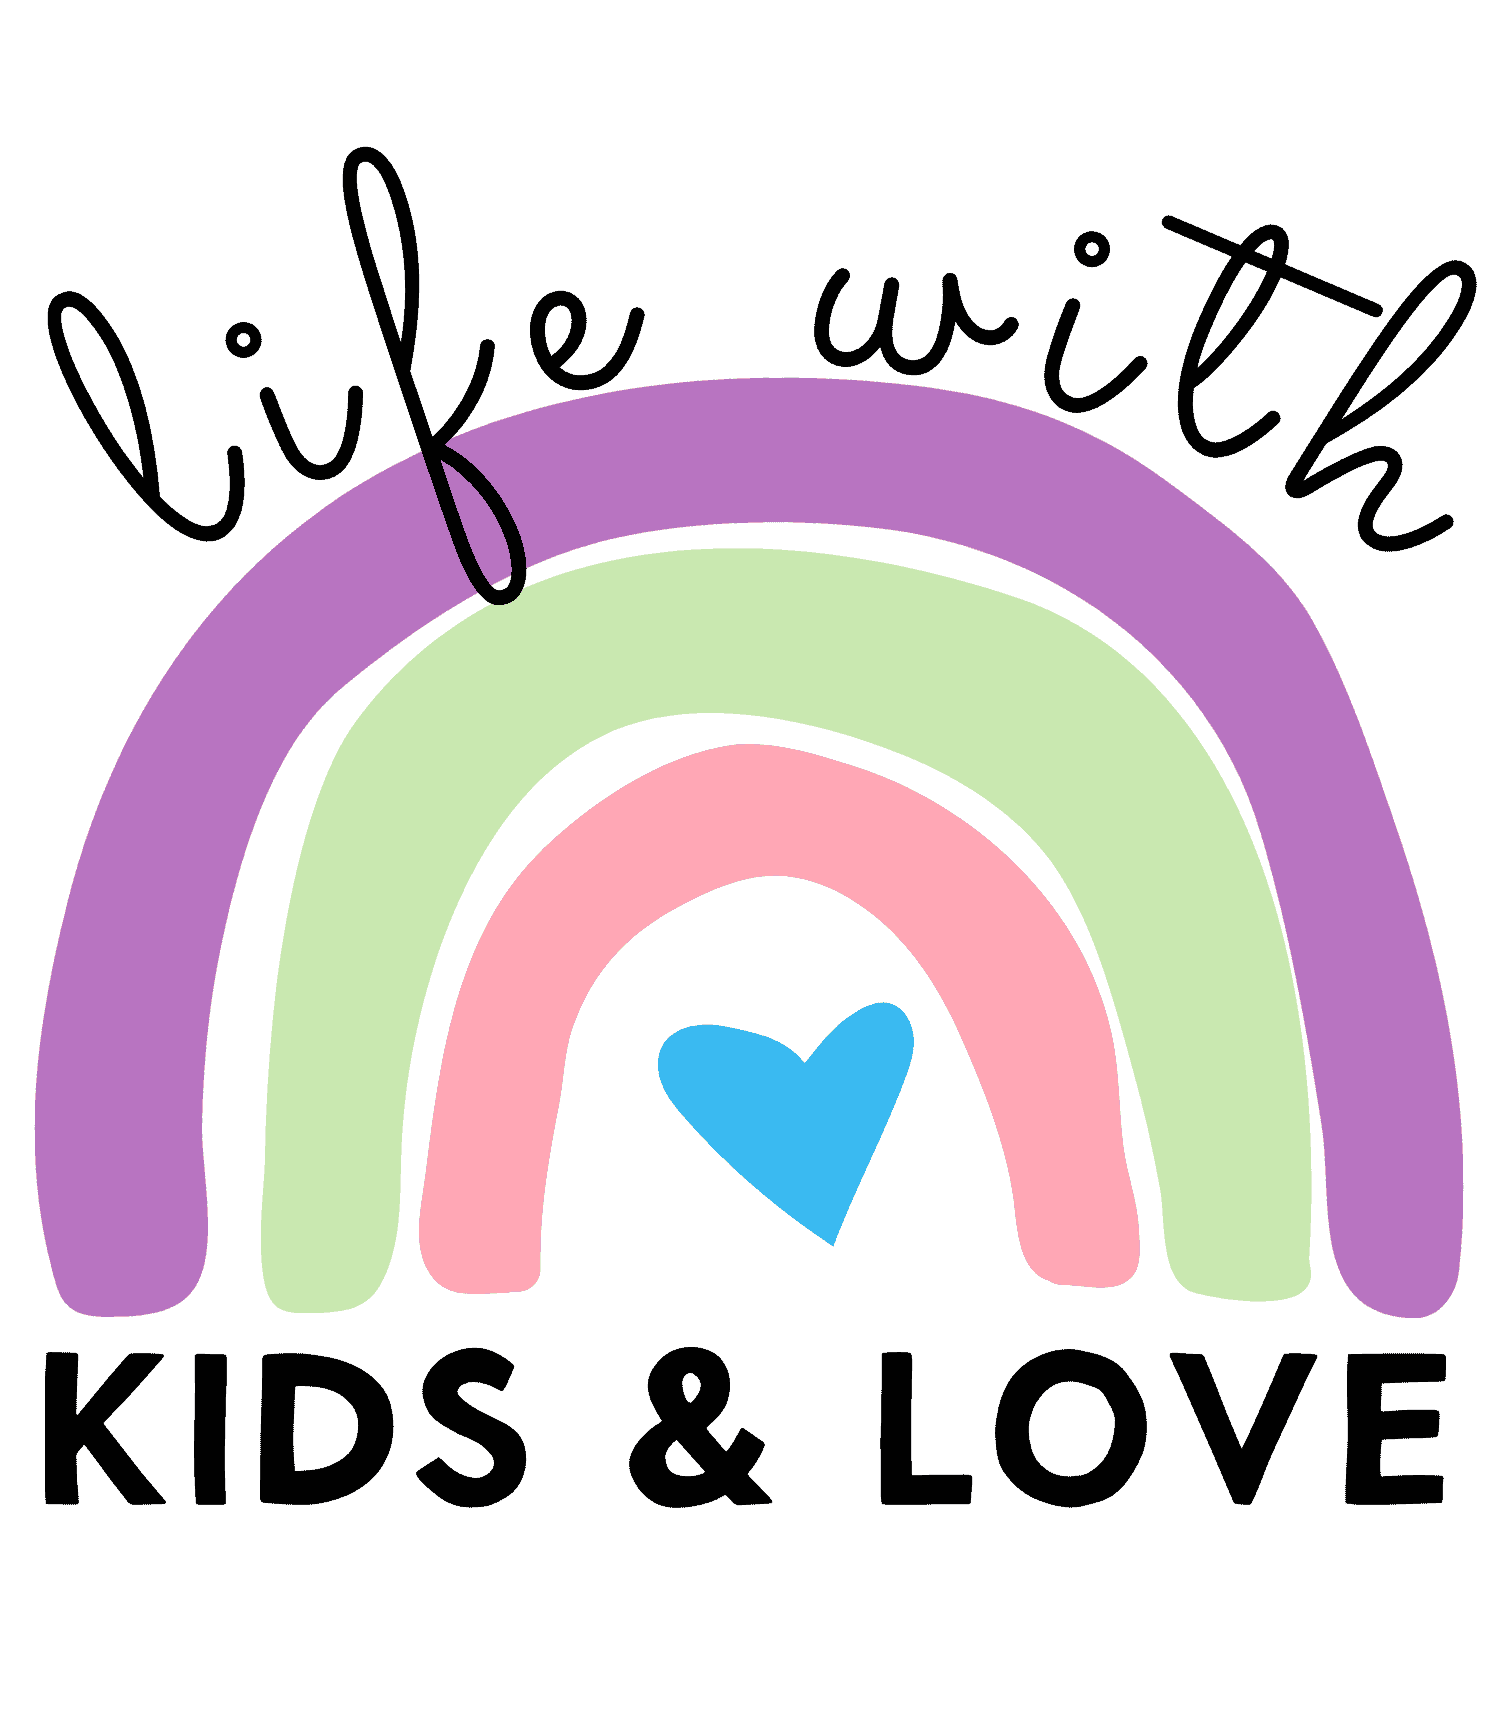 About Life with Kids and Love